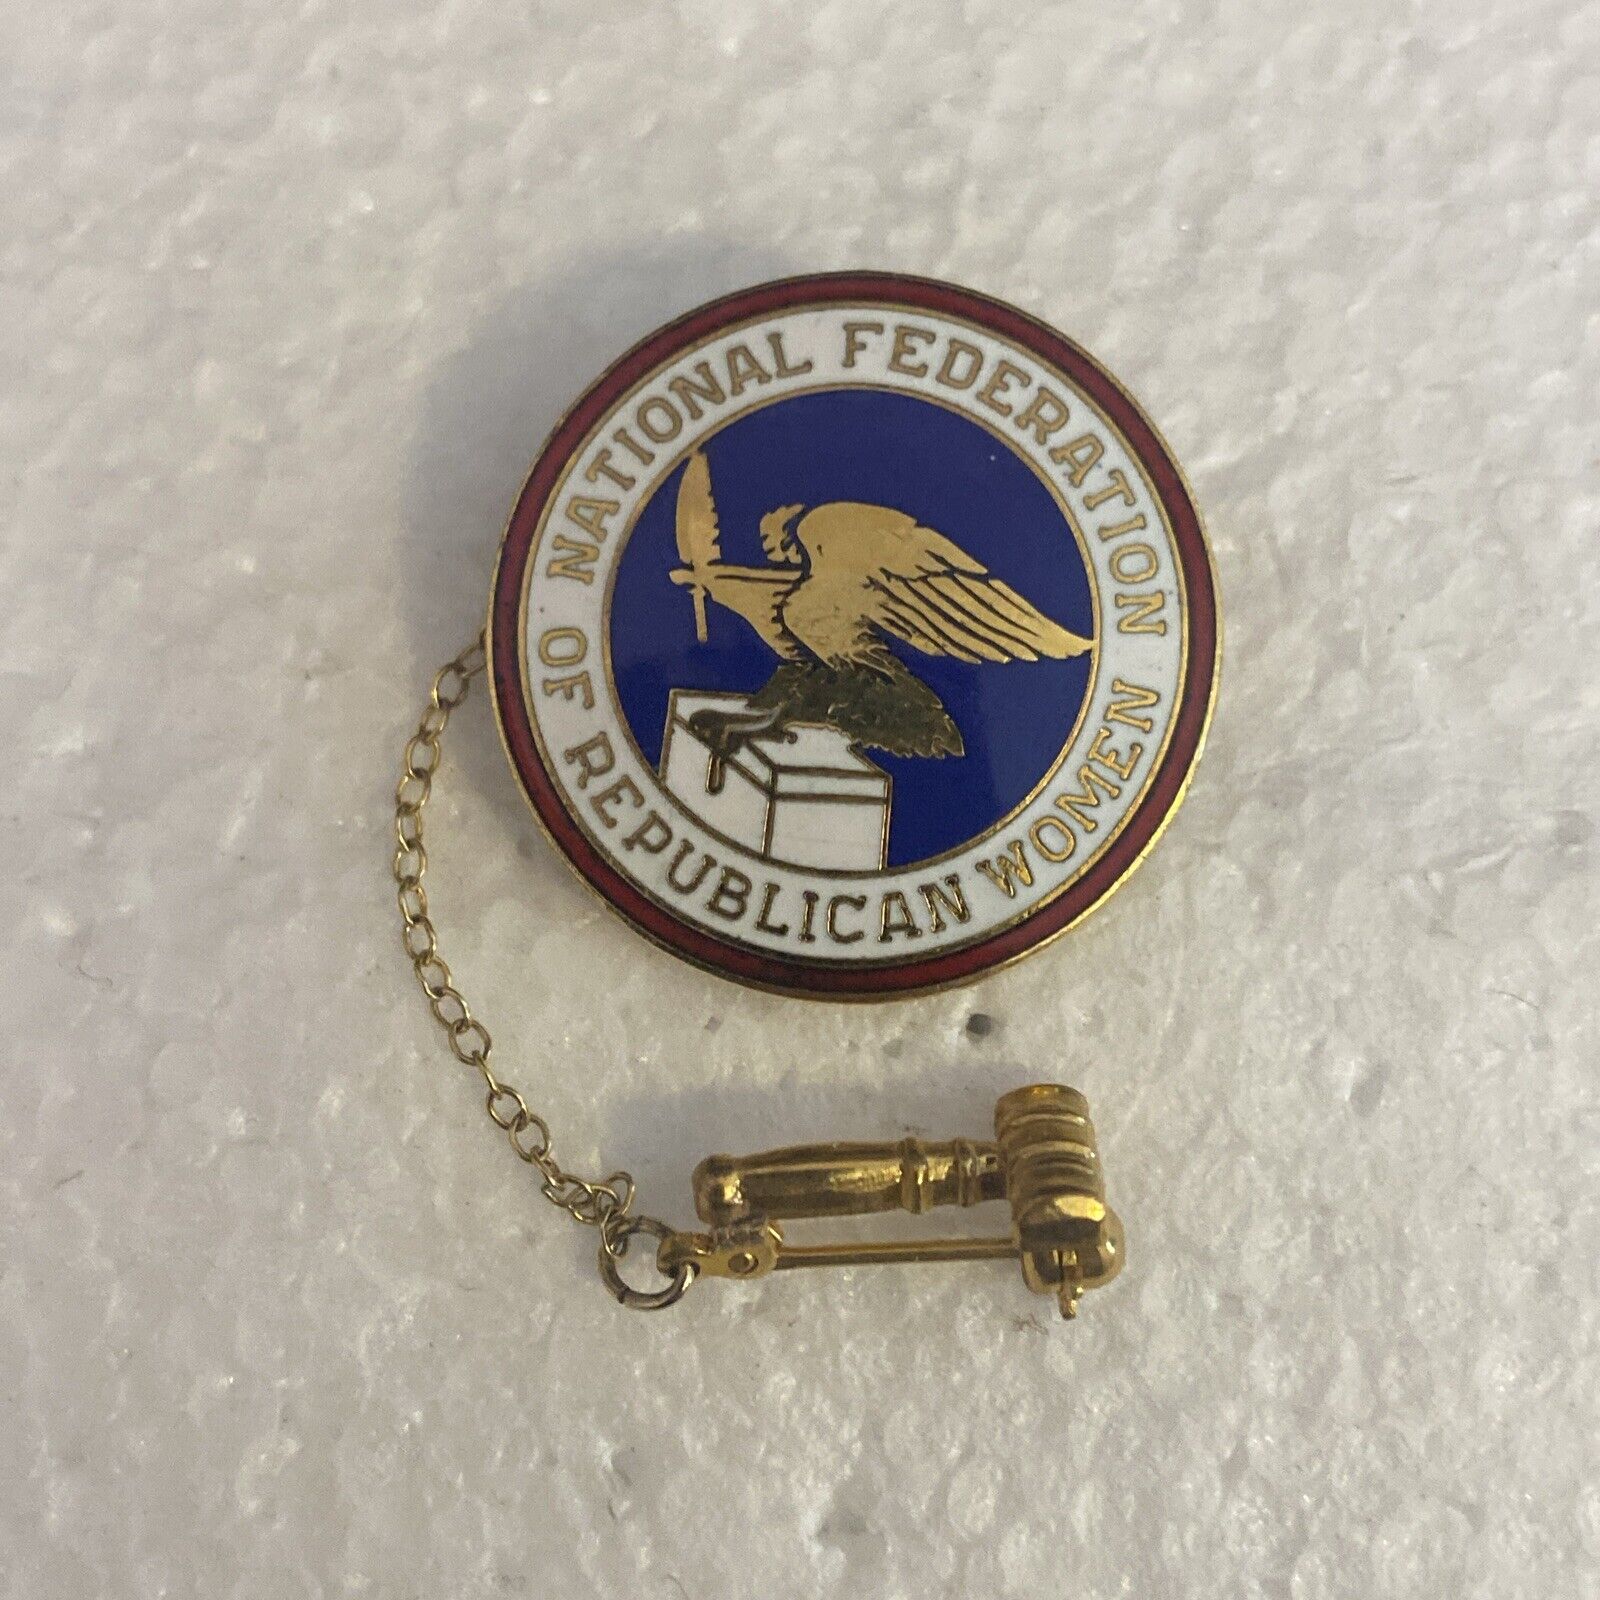 Vintage National Federation Of Republican Women Lapel Pin